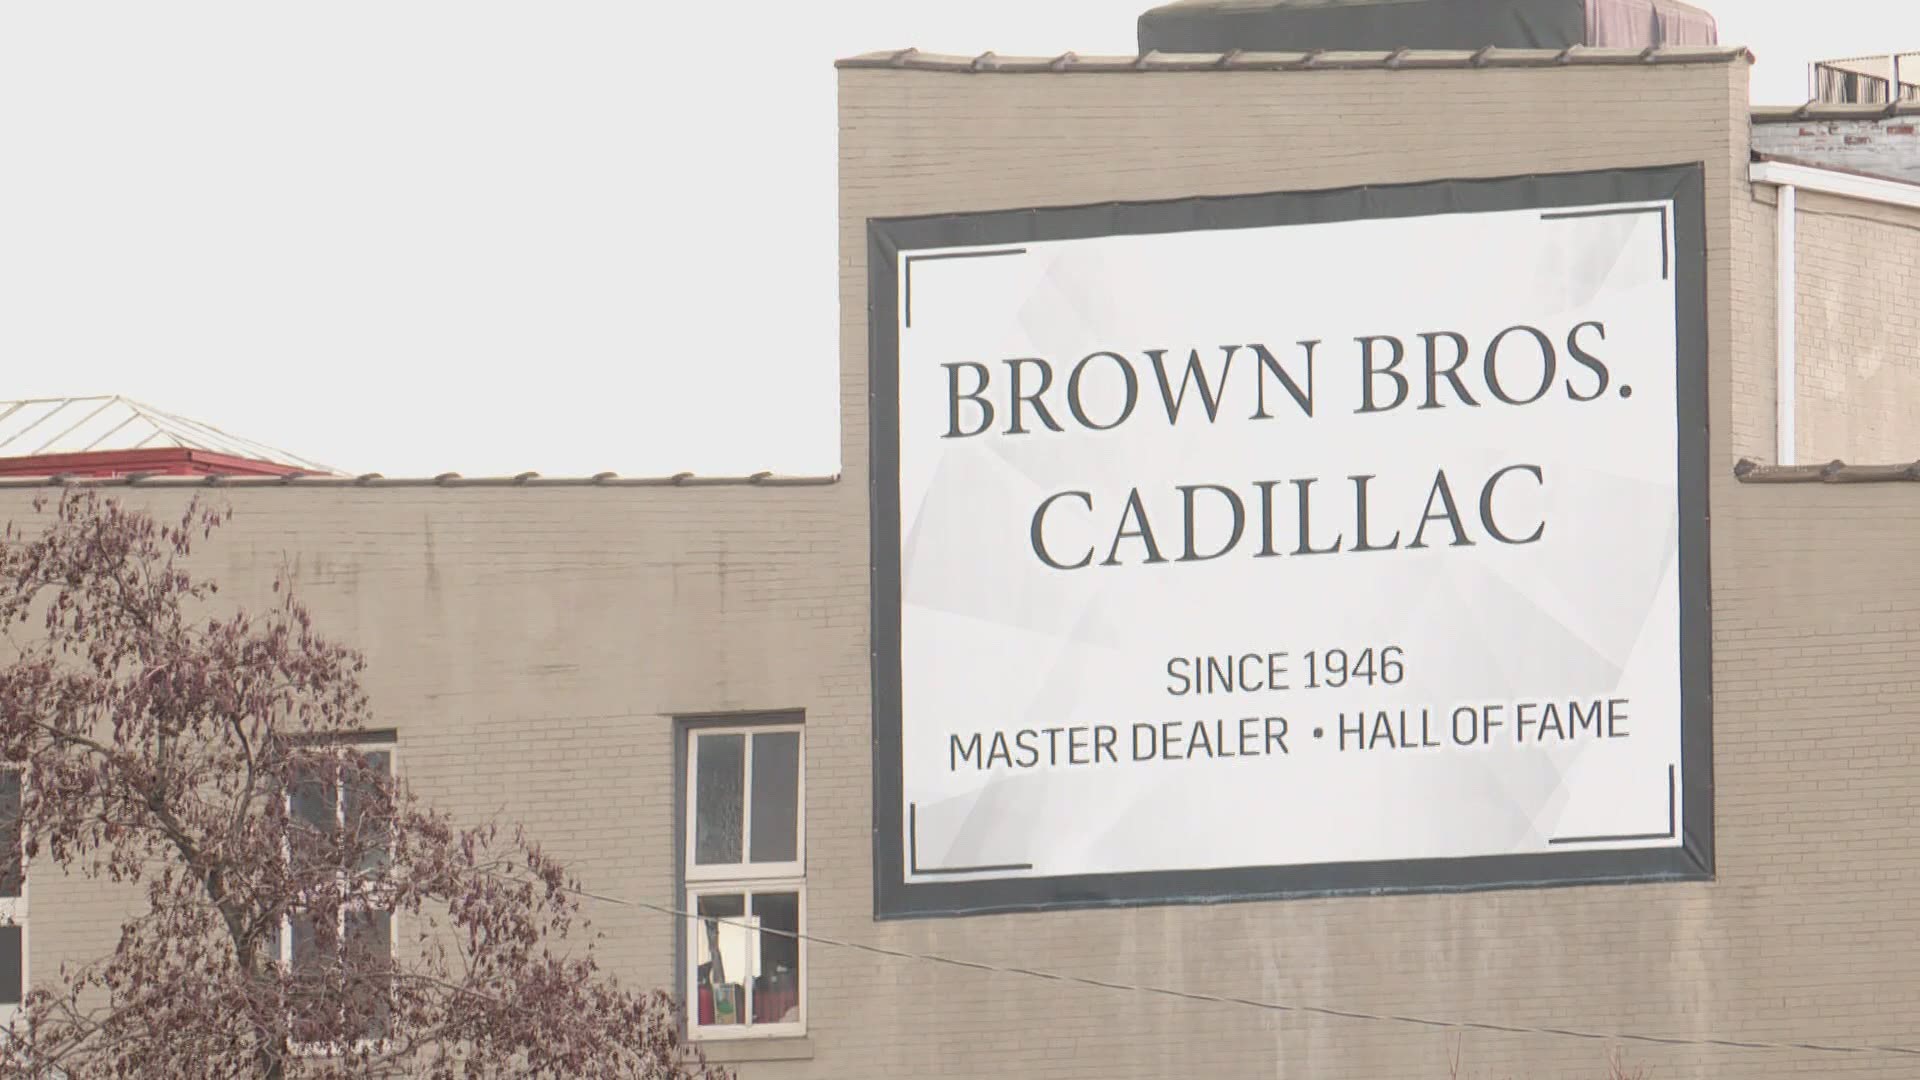 A downtown staple for more than 75 years, Brown Bros. Cadillac announced Thursday evening it would be closing its doors next months.